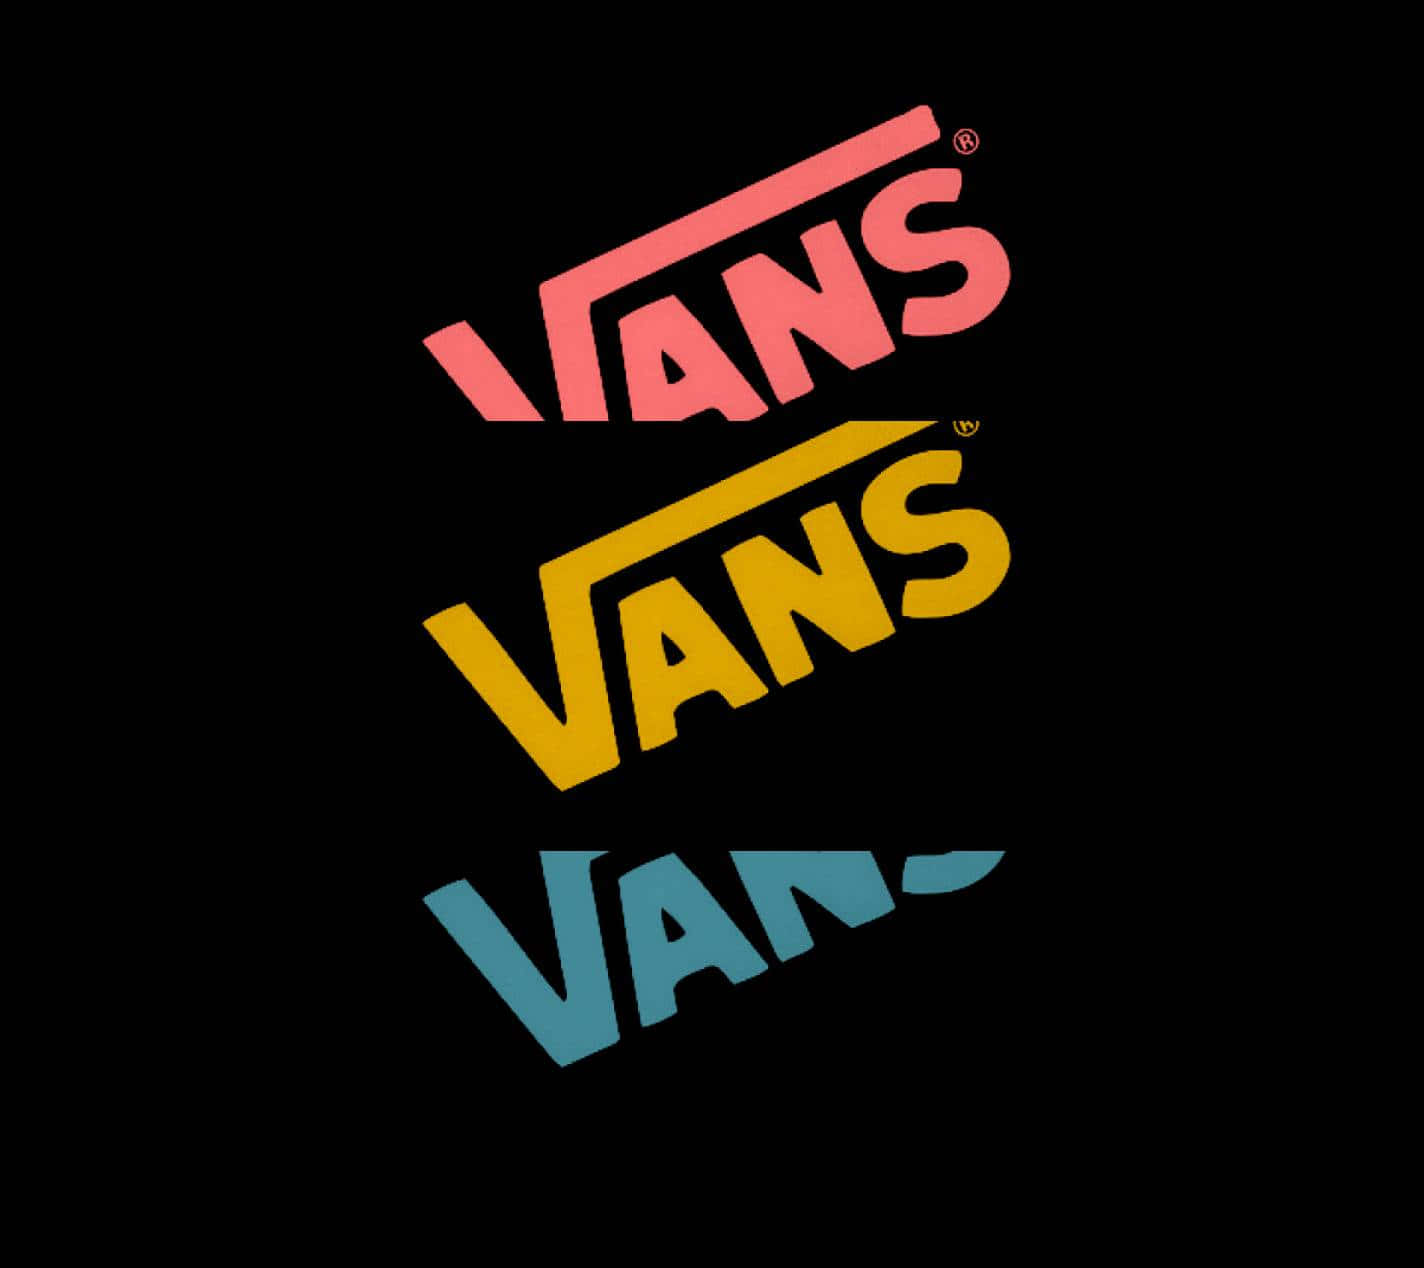 Get a Cool Vibe with the Vans Logo Wallpaper